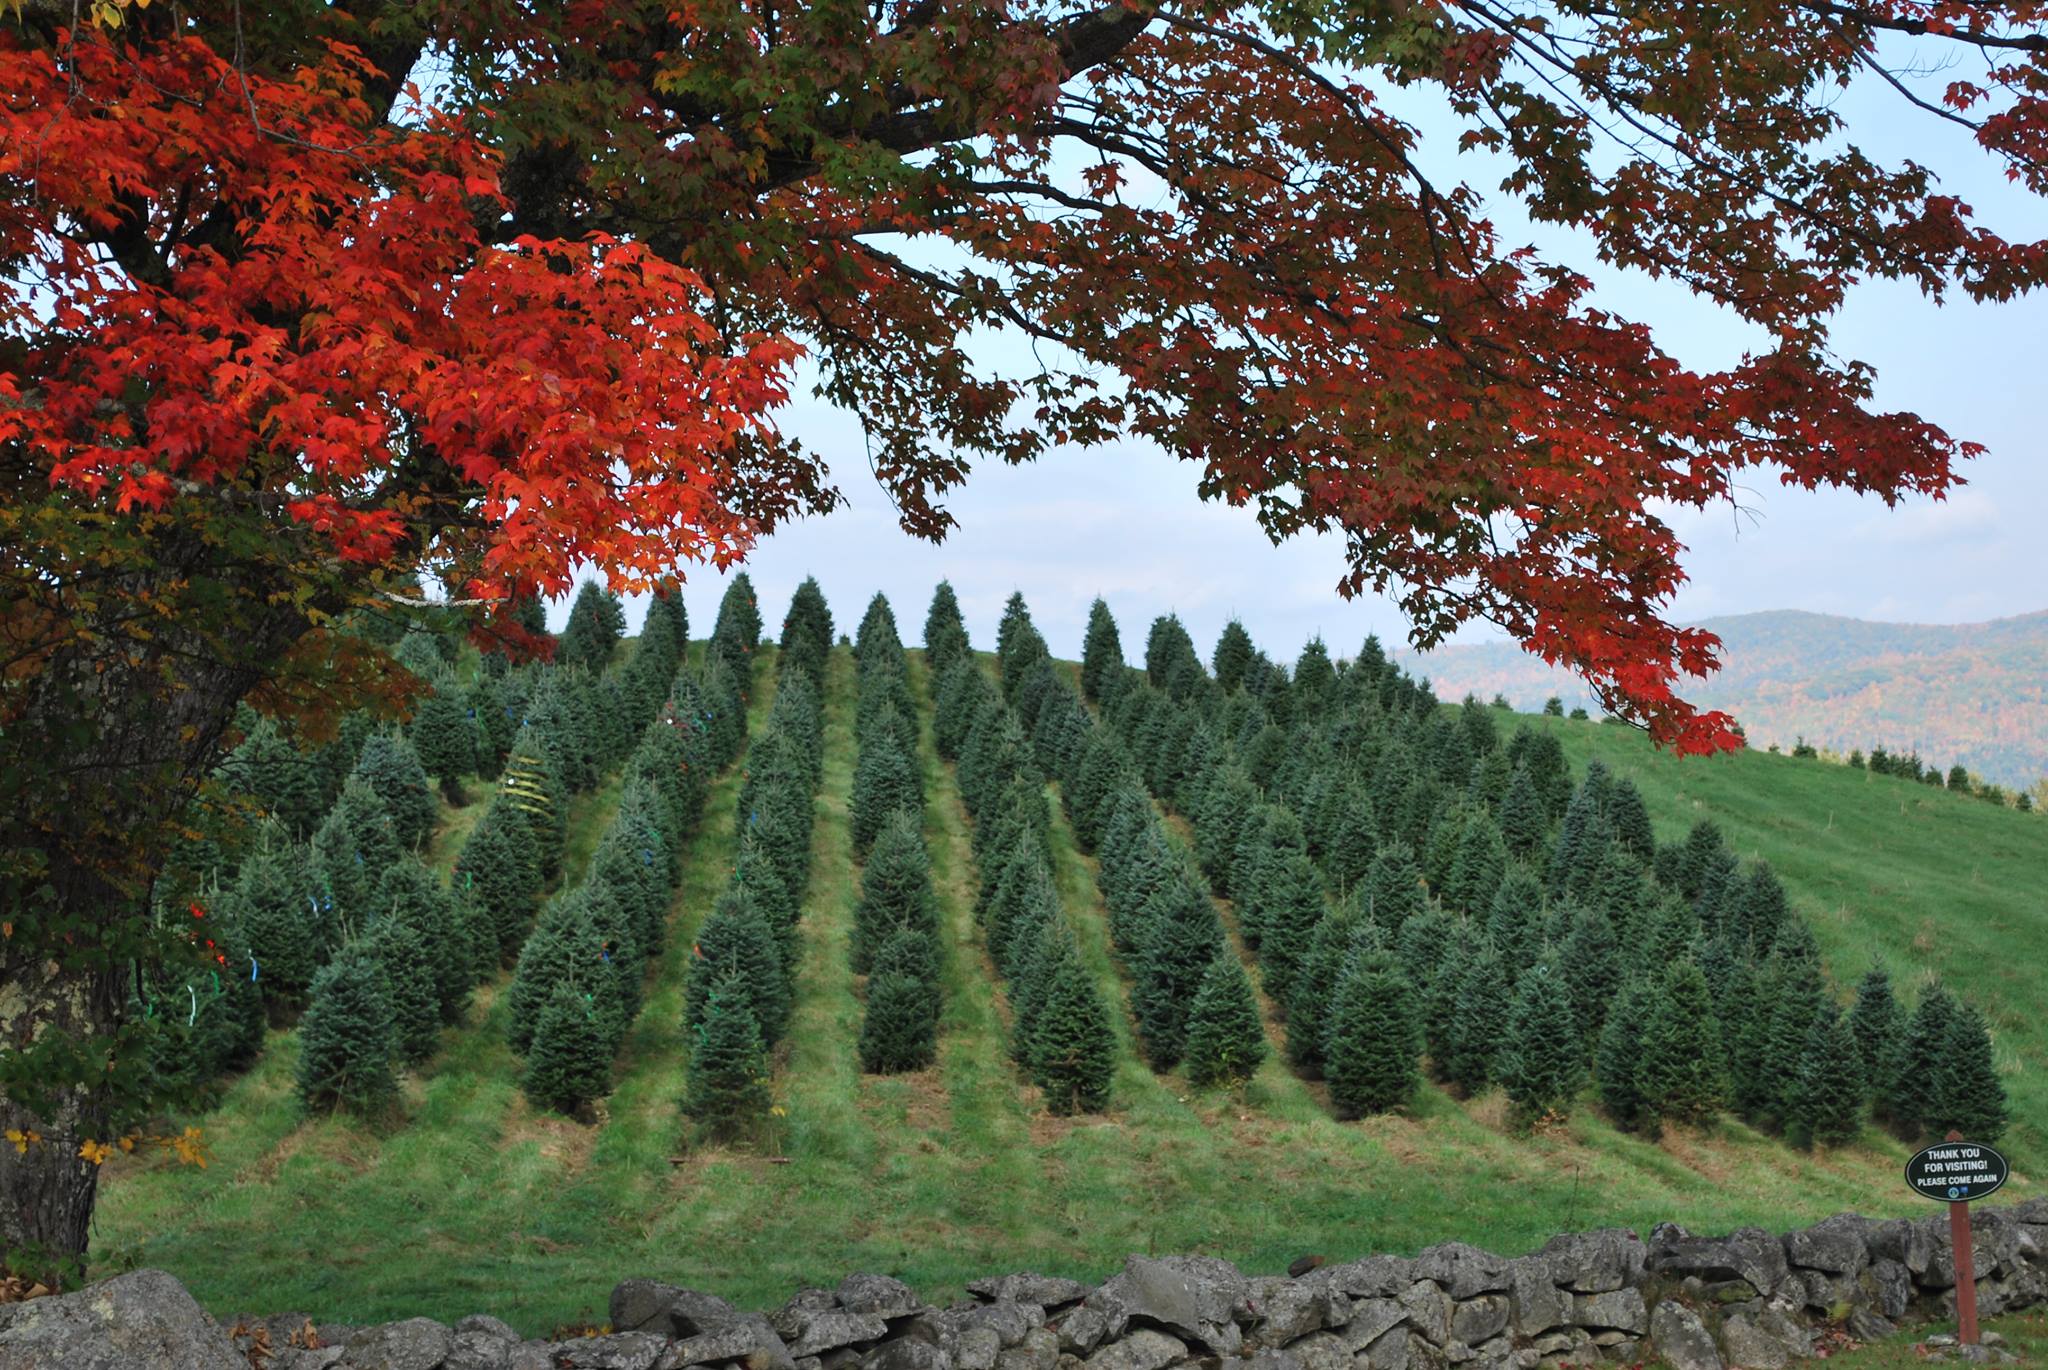 Red leaves frame a view of rows of growing Christmas trees.